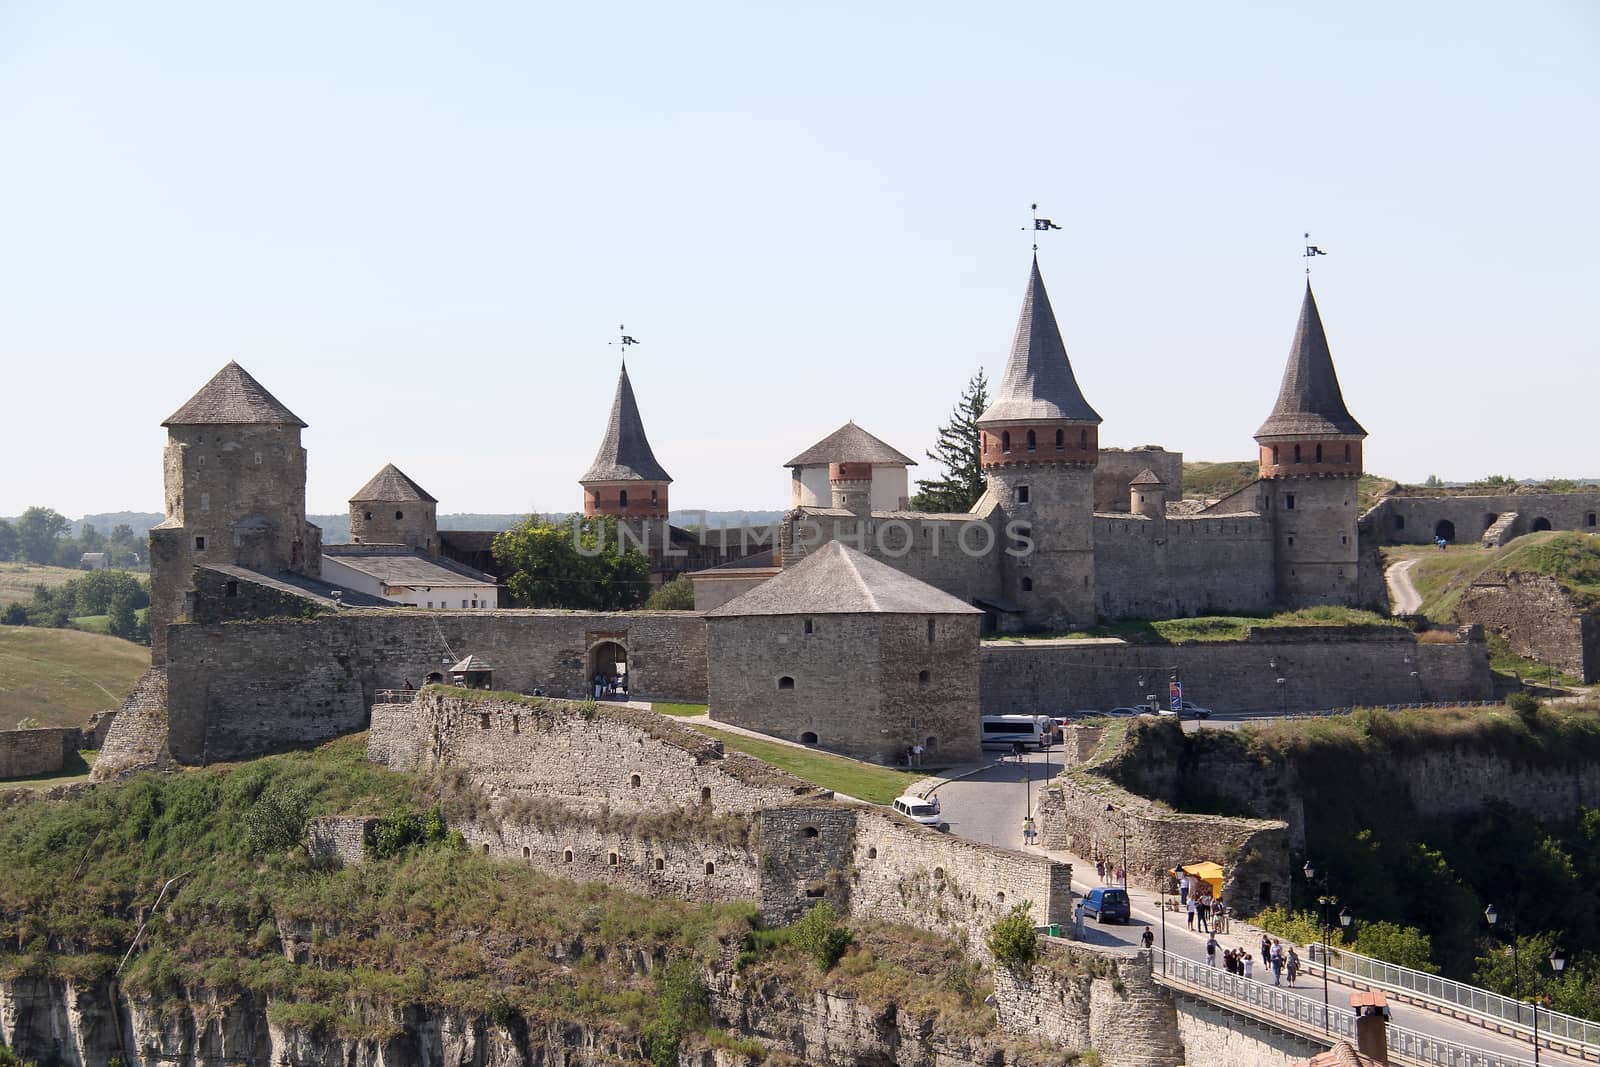 Kamianets-Podilskyi castle by Aarstudio